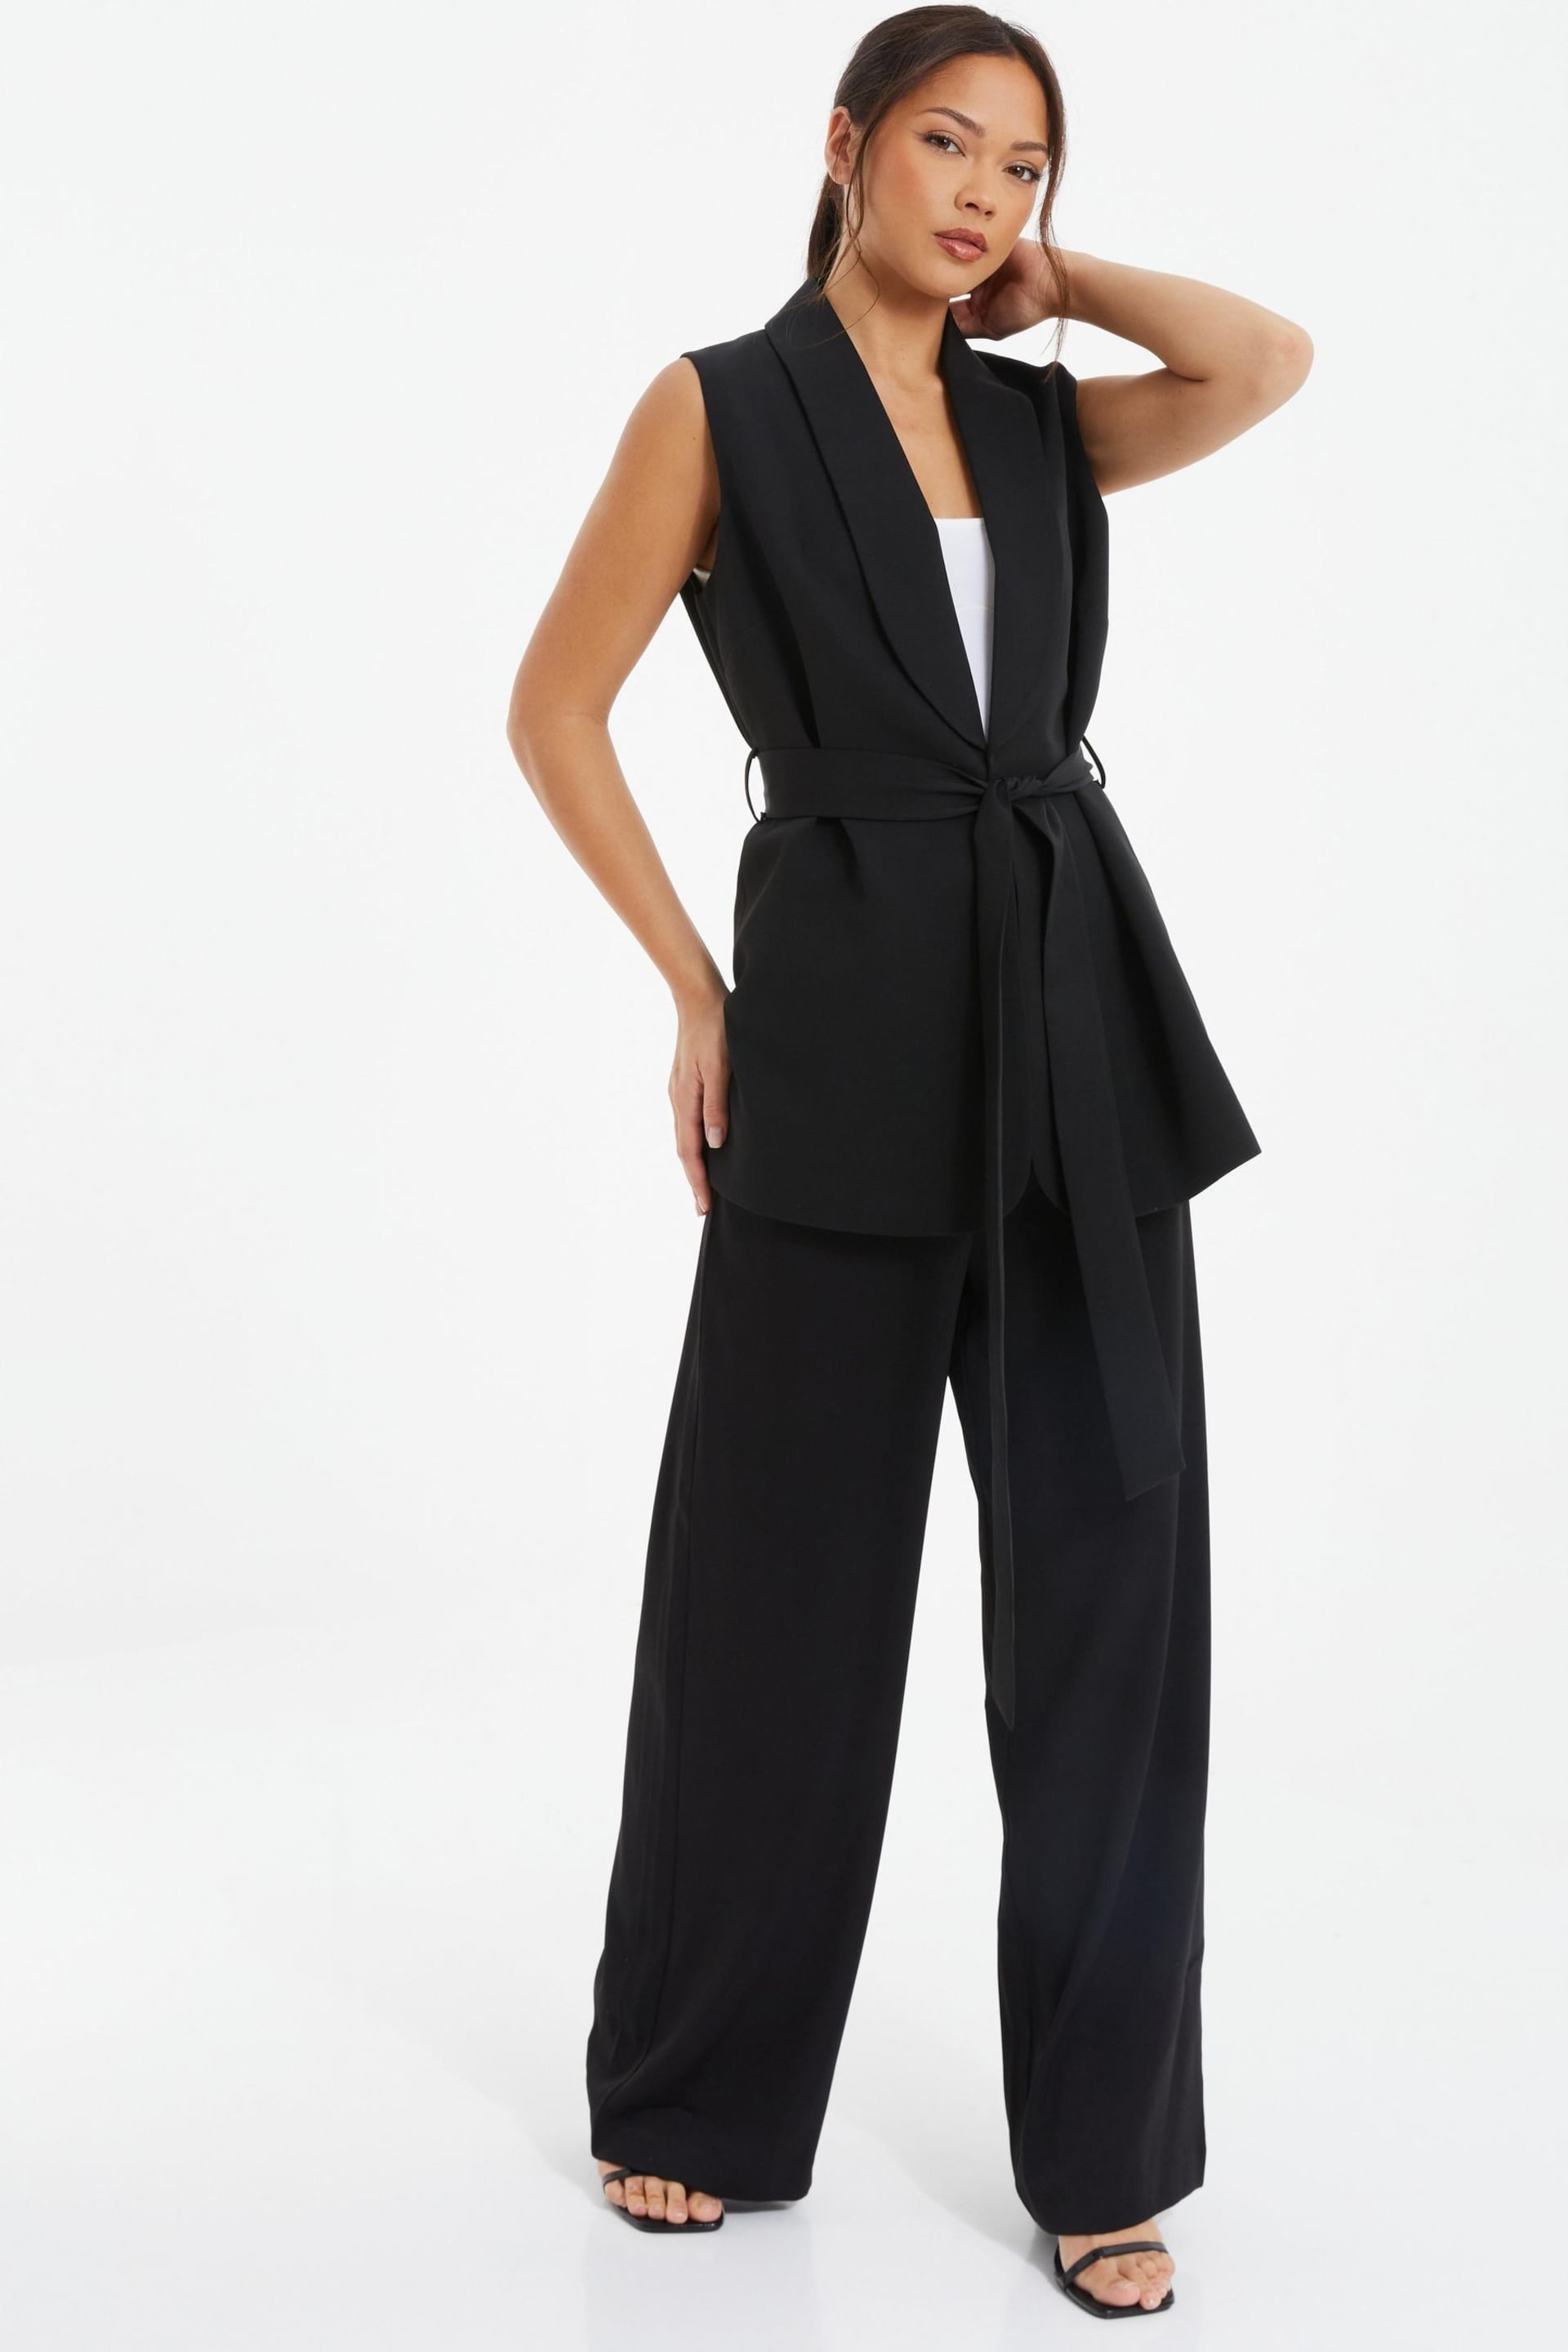 Quiz Black Woven Tailored Waistcoat With Tie Waist - Image 1 of 4